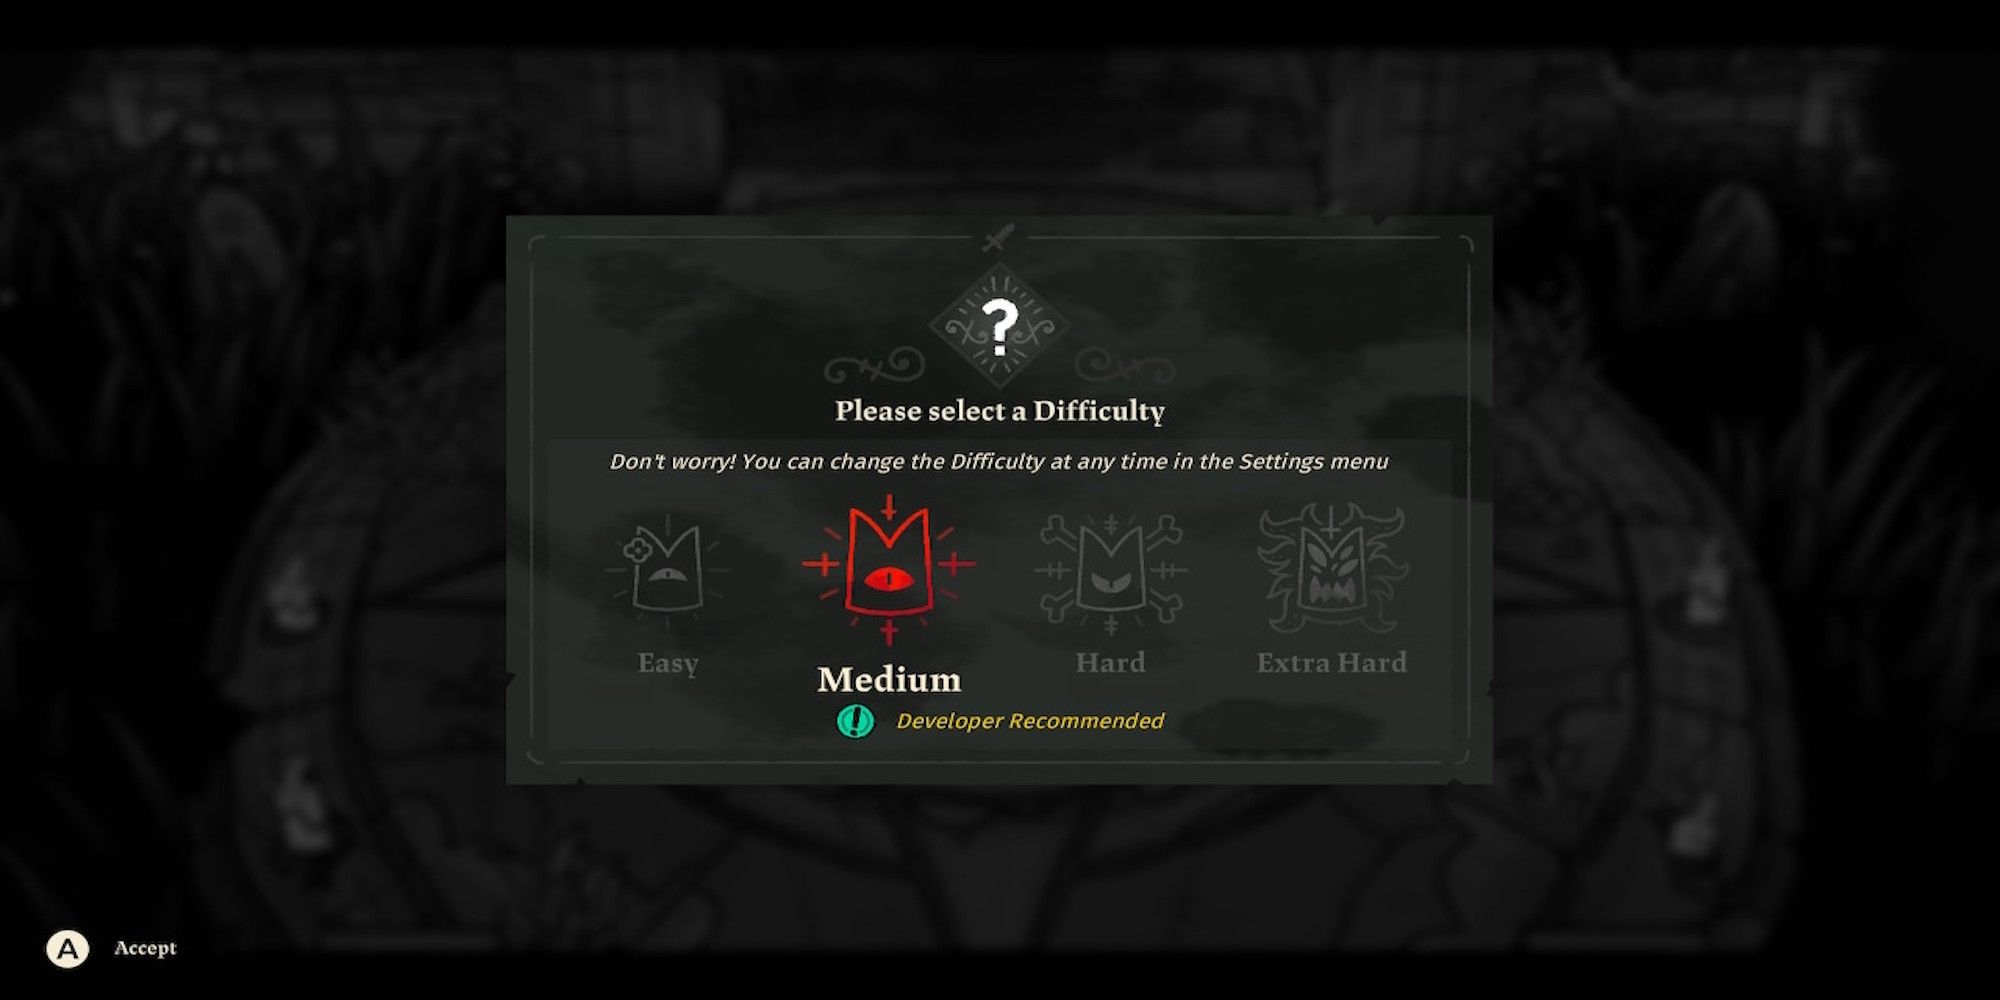 The difficulty menu in Cult of the Lamb